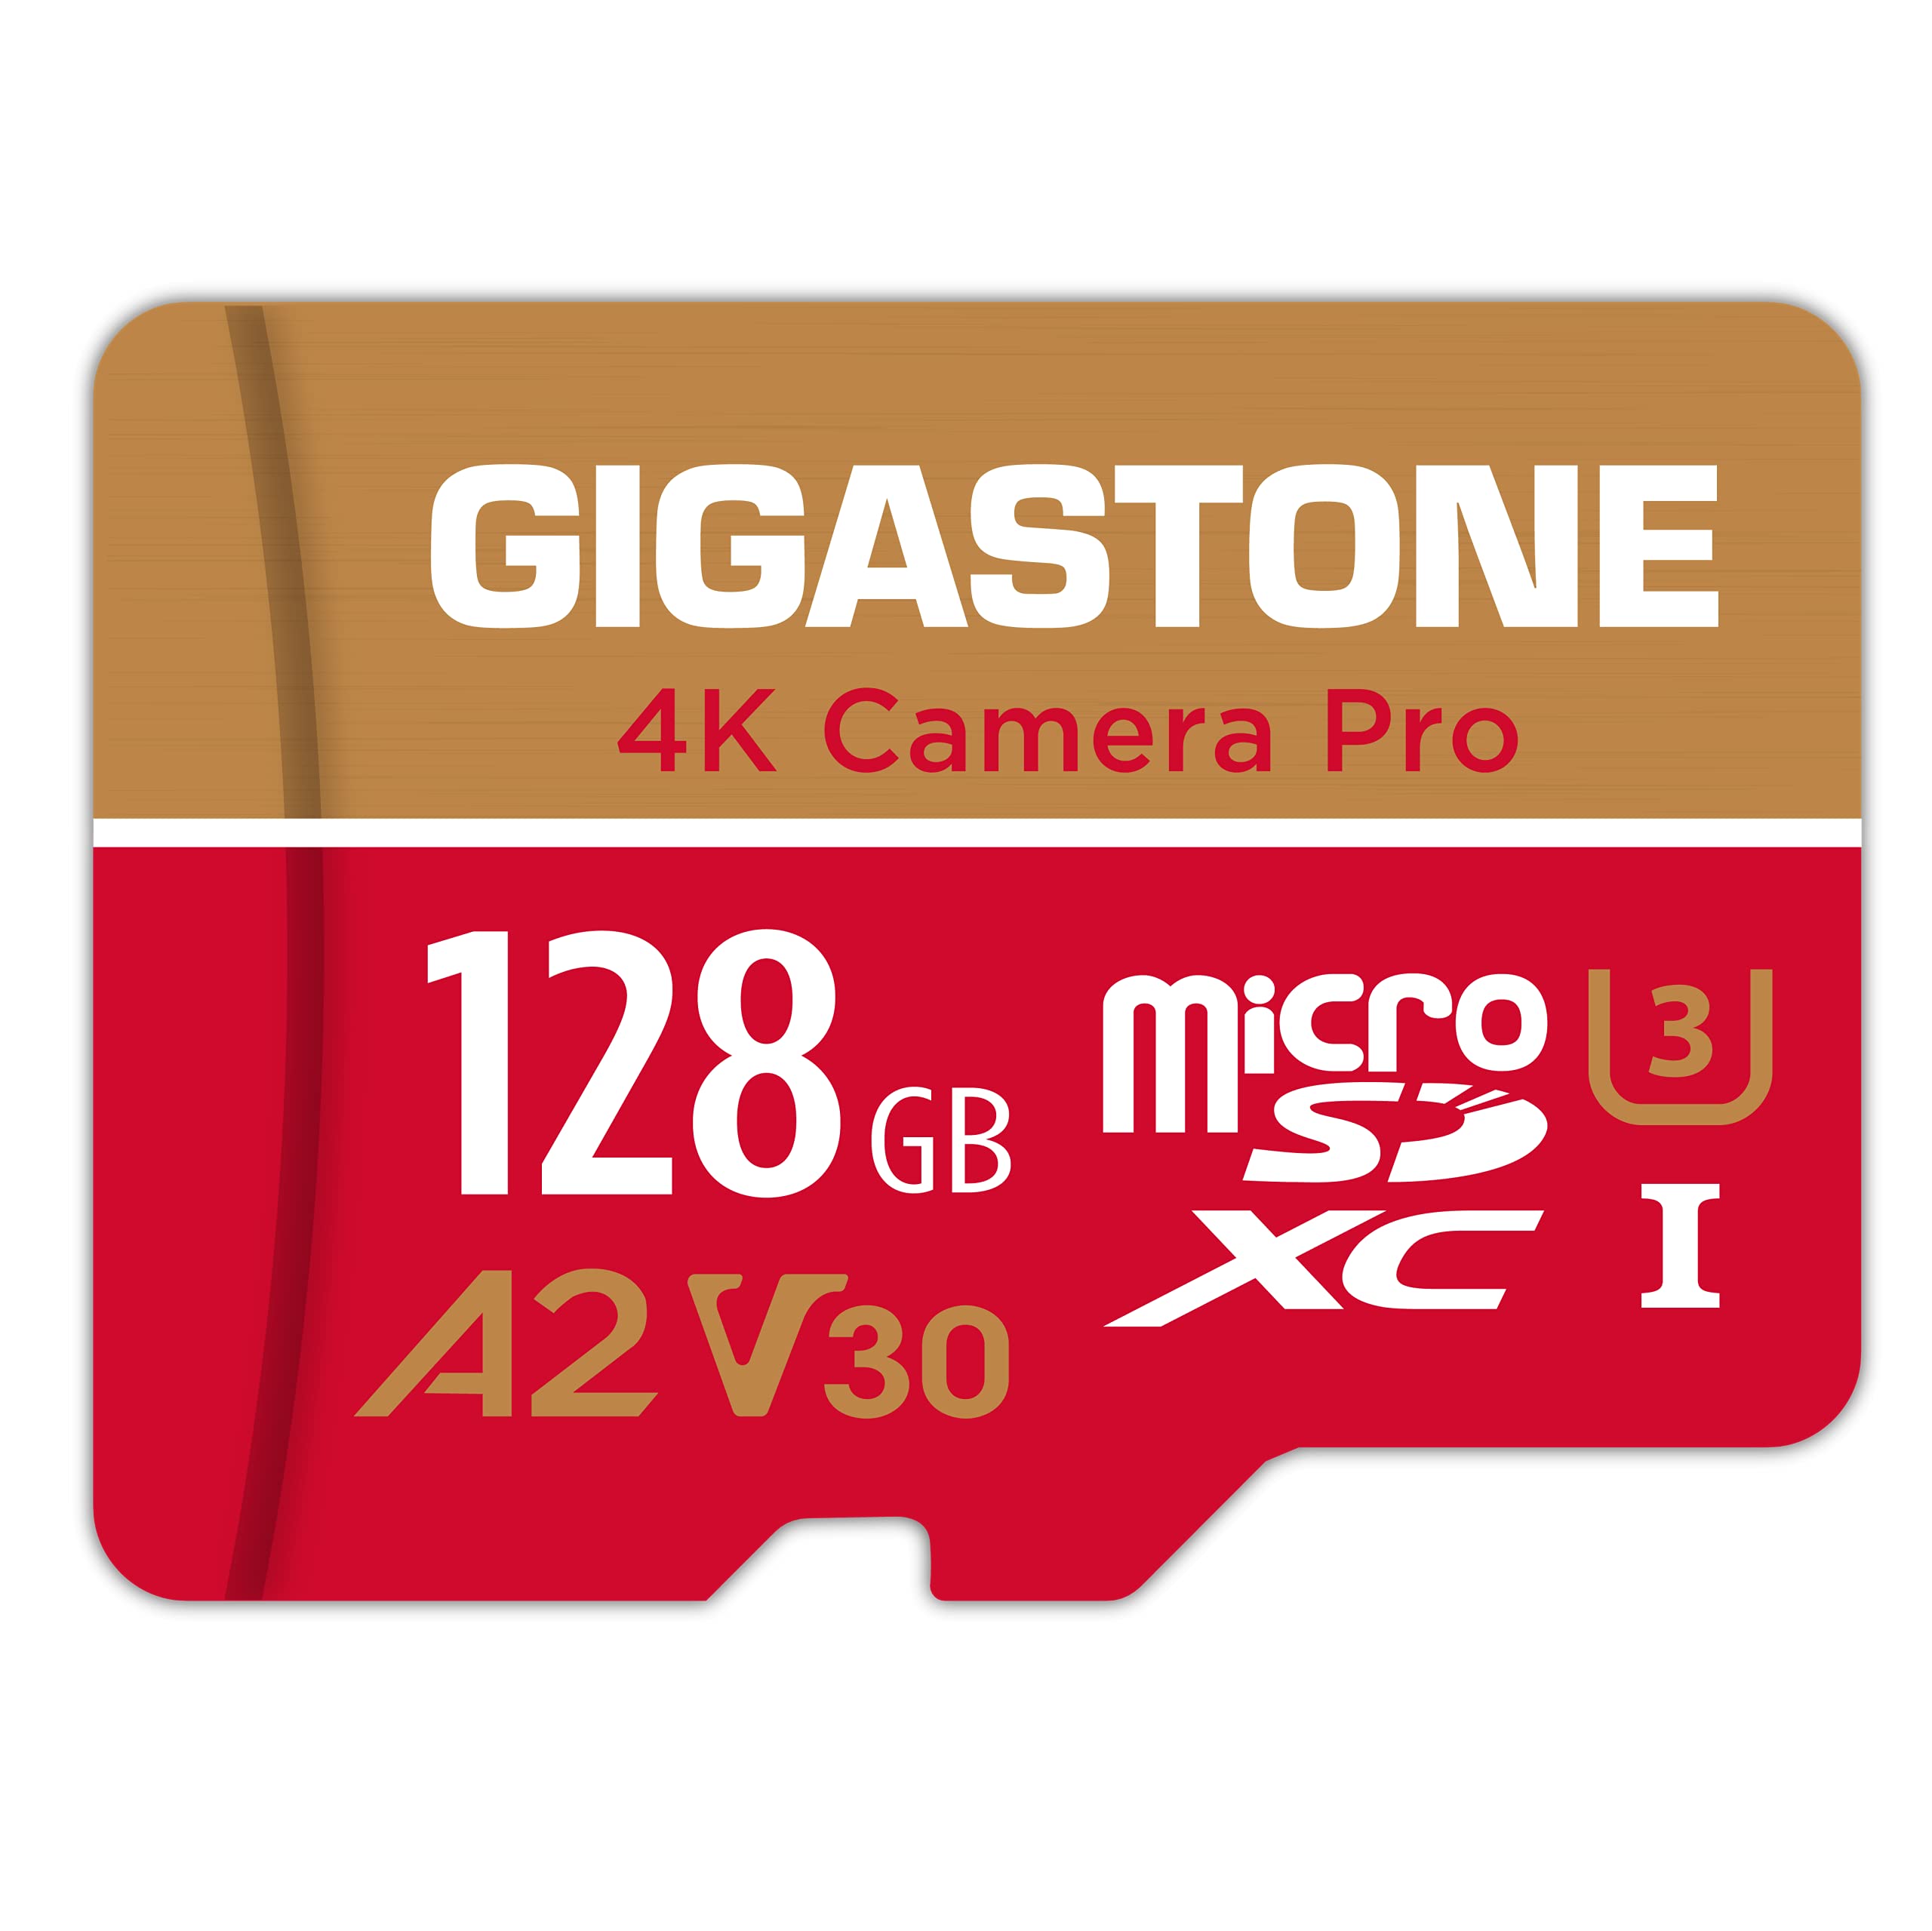 Gigastone 128GB Micro SD Card, 4K Camera Pro, 4K Video Recording for GoPro, Insta360, DJI, Drone, Nintendo-Switch, R/W up to 100/50 MB/s MicroSDXC Memory Card UHS-I U3 A2 V30, with Adapter